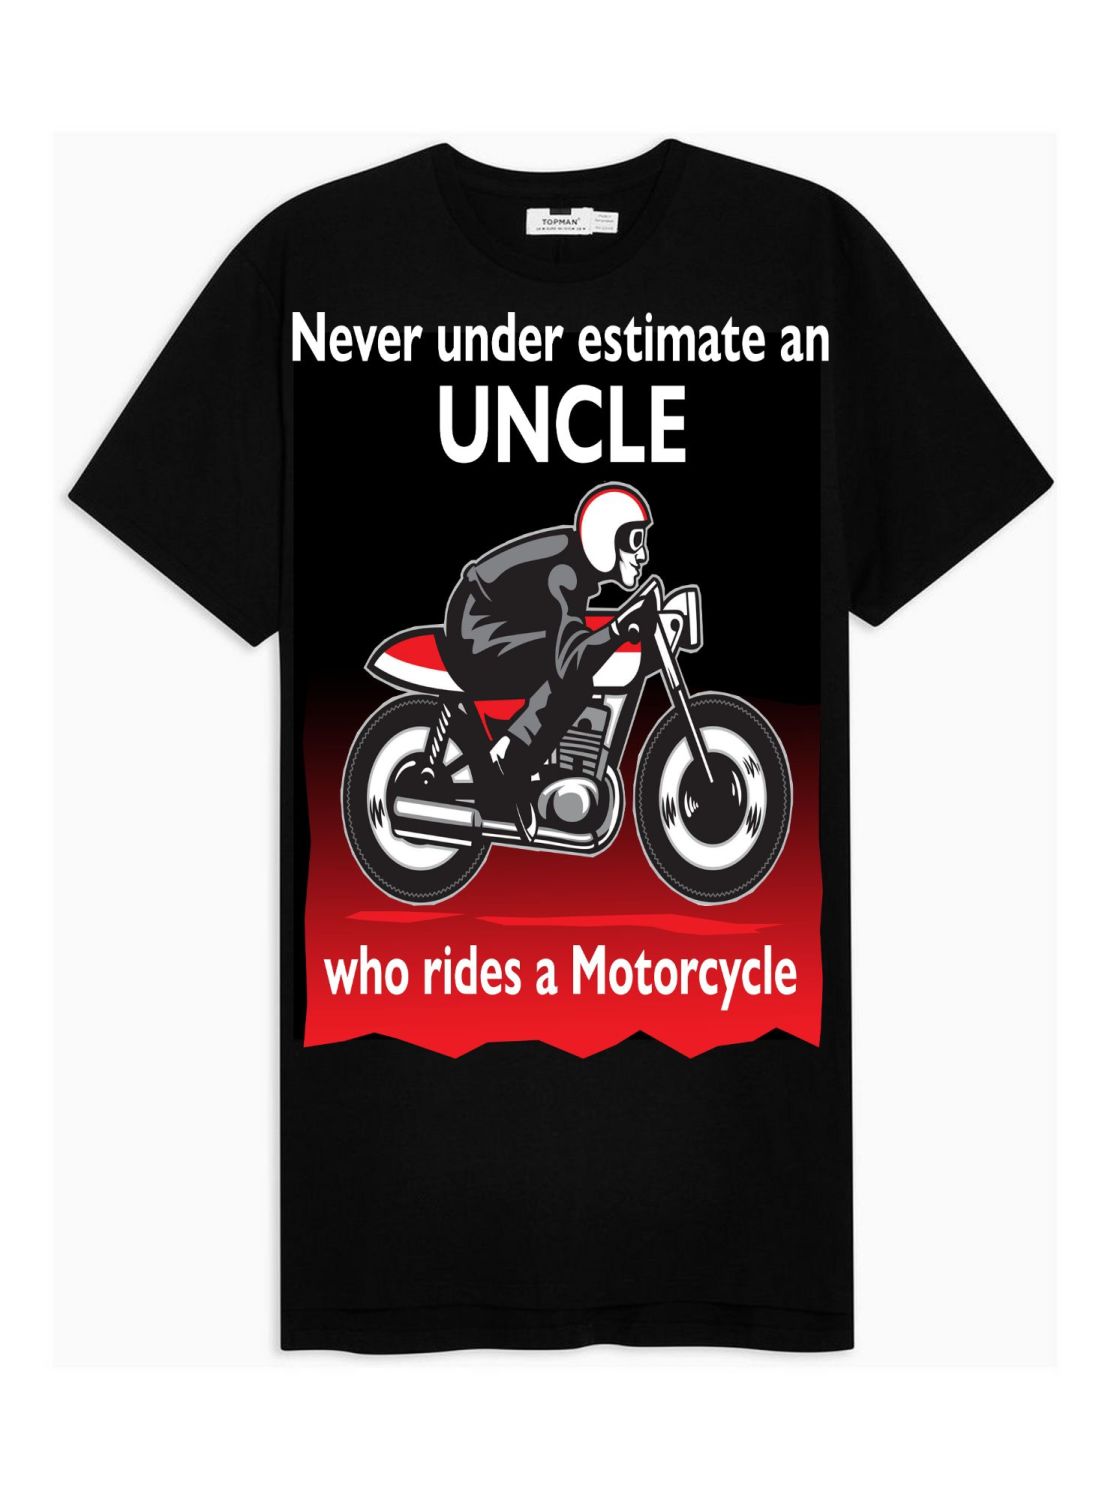 Never under estimate a Uncle who rides a motorcycle mens black tshirt t-shi